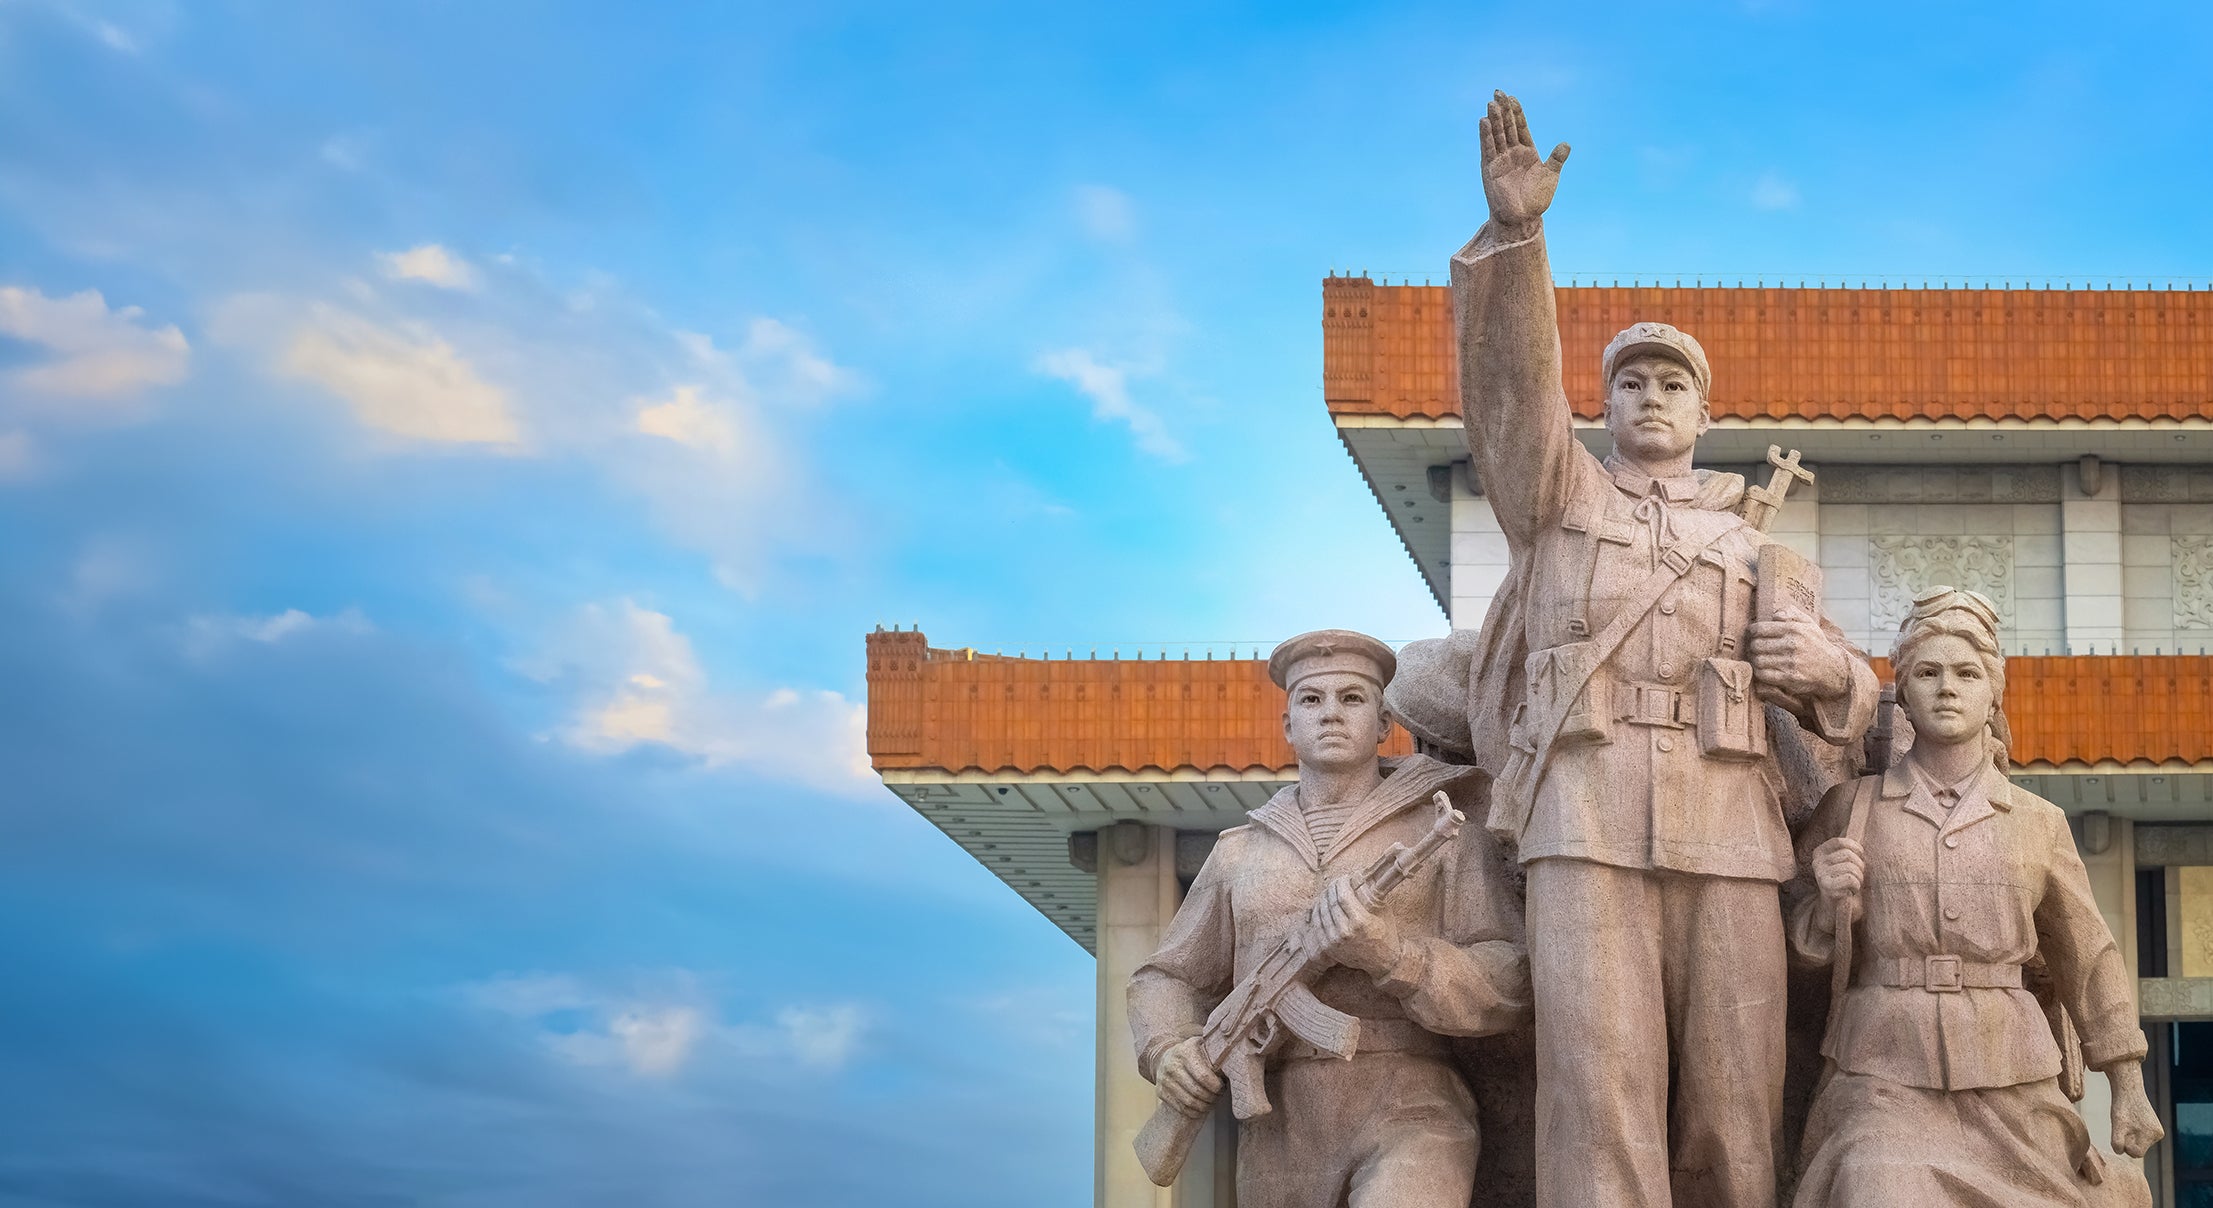 Statue of three historical Chinese military figures in front of a building